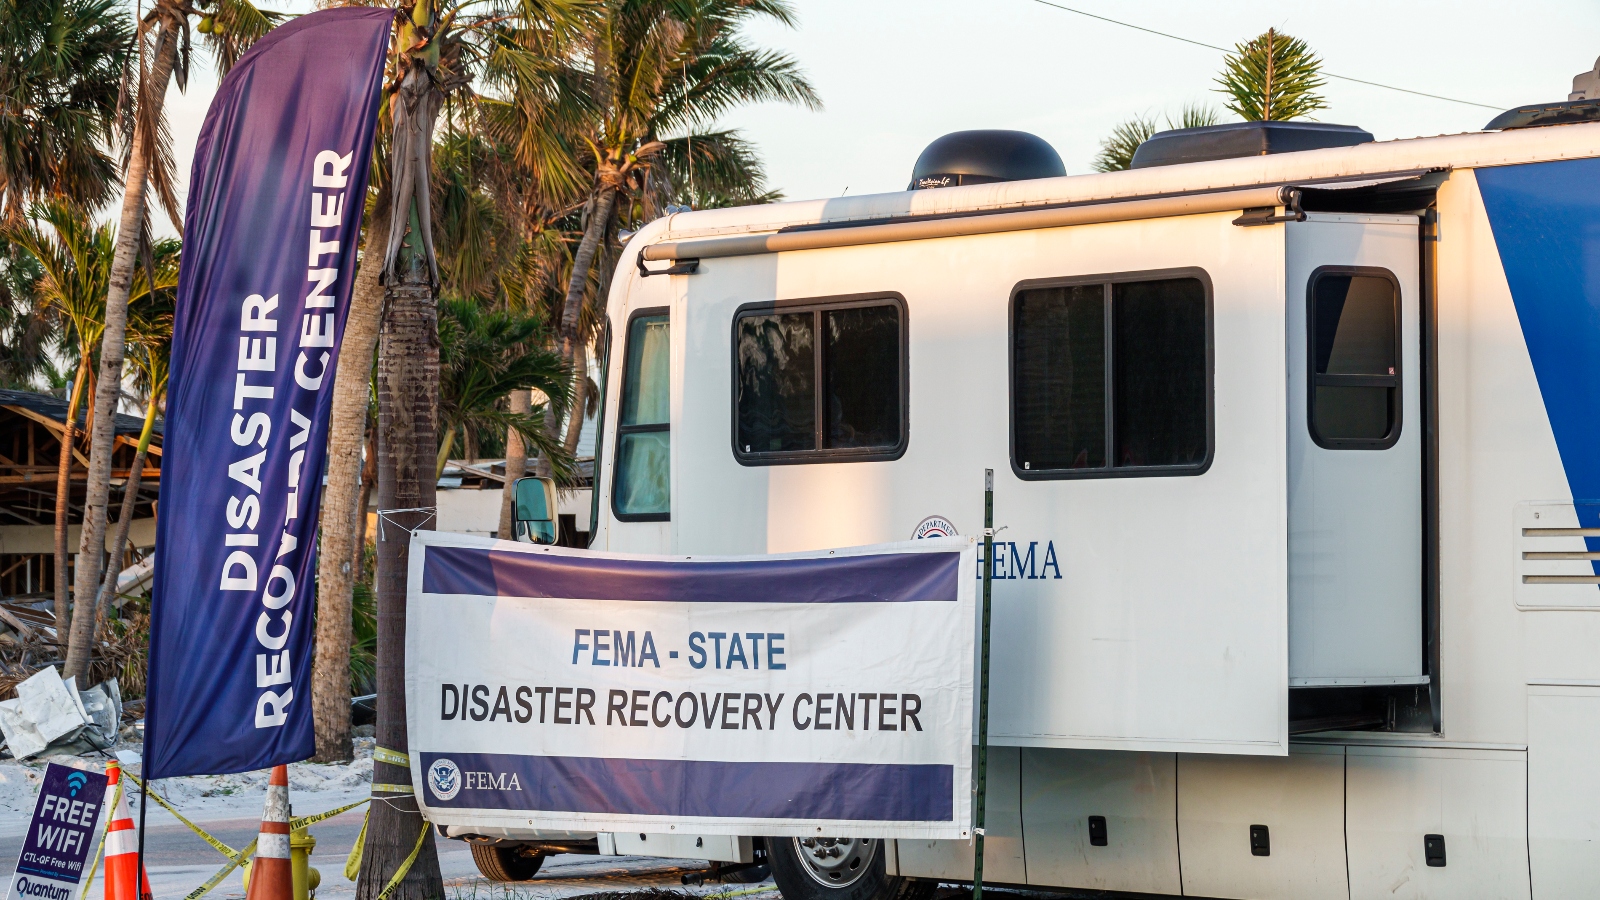 A mobile FEMA information center in Fort Myers following Hurricane Ian in 2022.